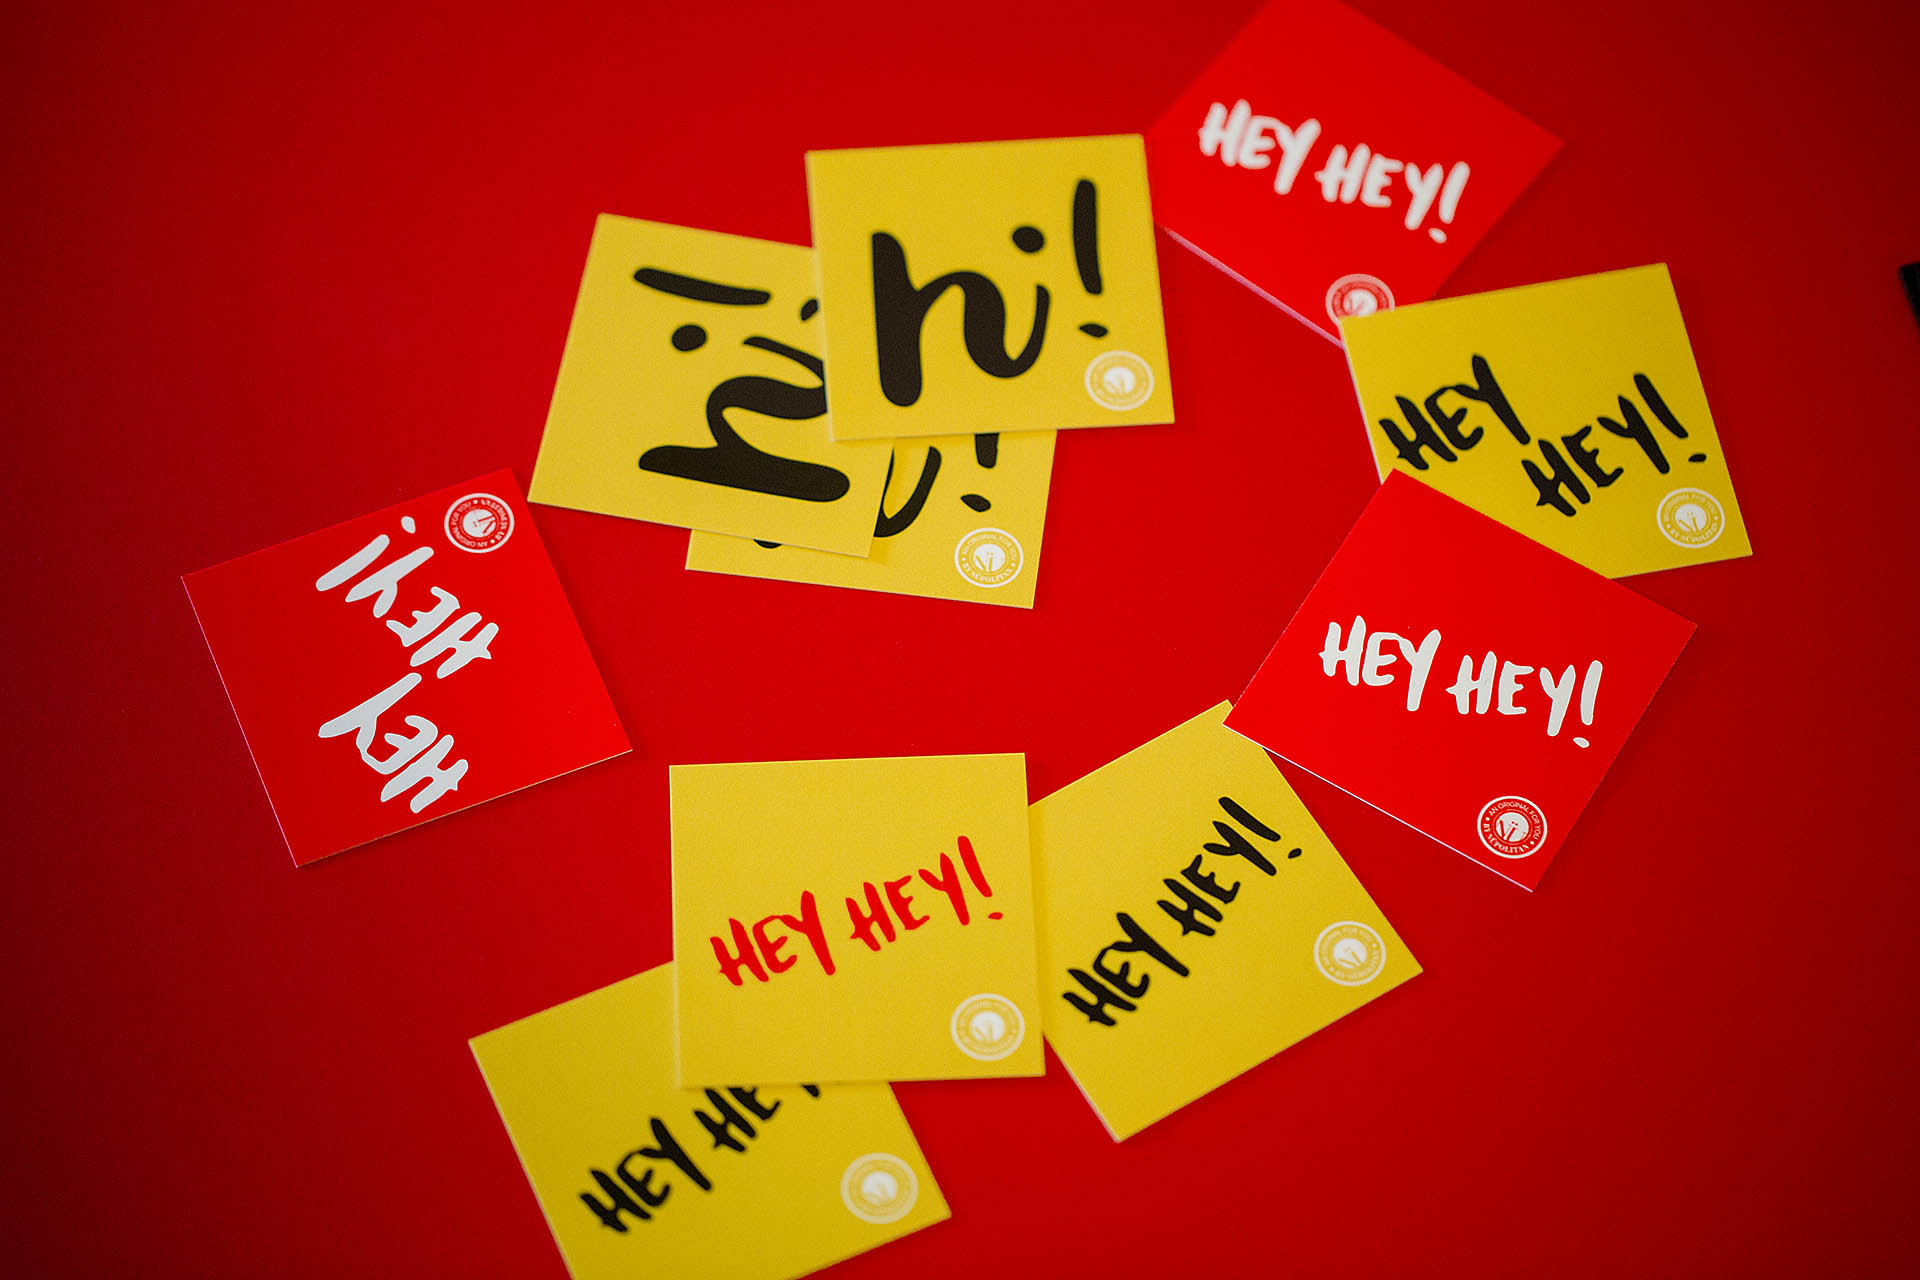 Red and yellow square cards scattered on a red background